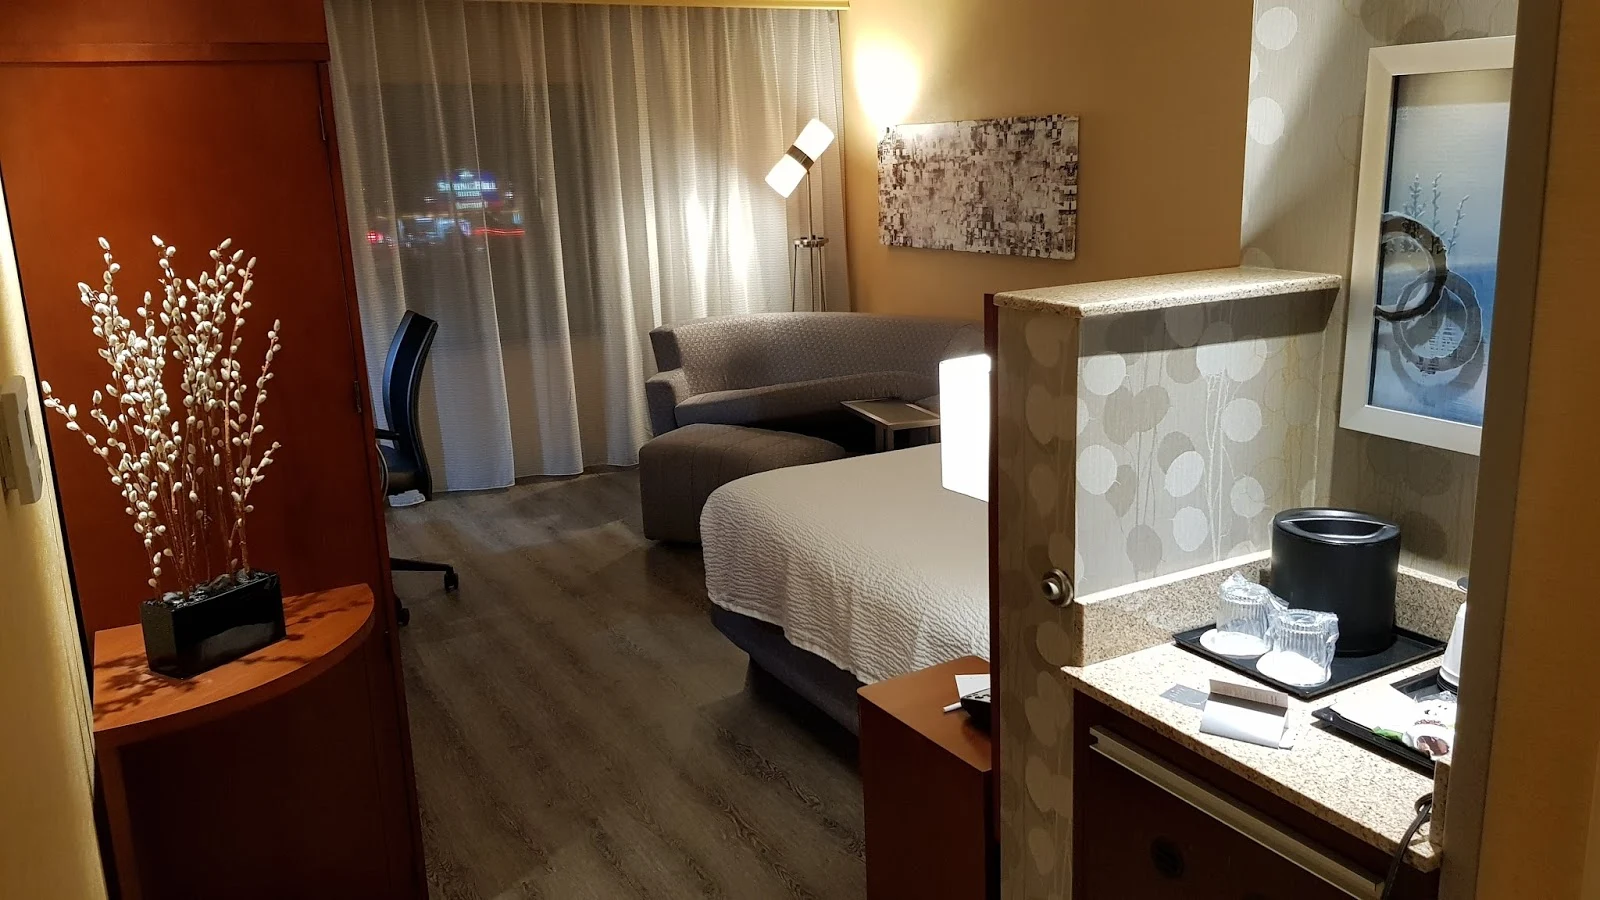 8th Stay：Courtyard Victorville Hesperia